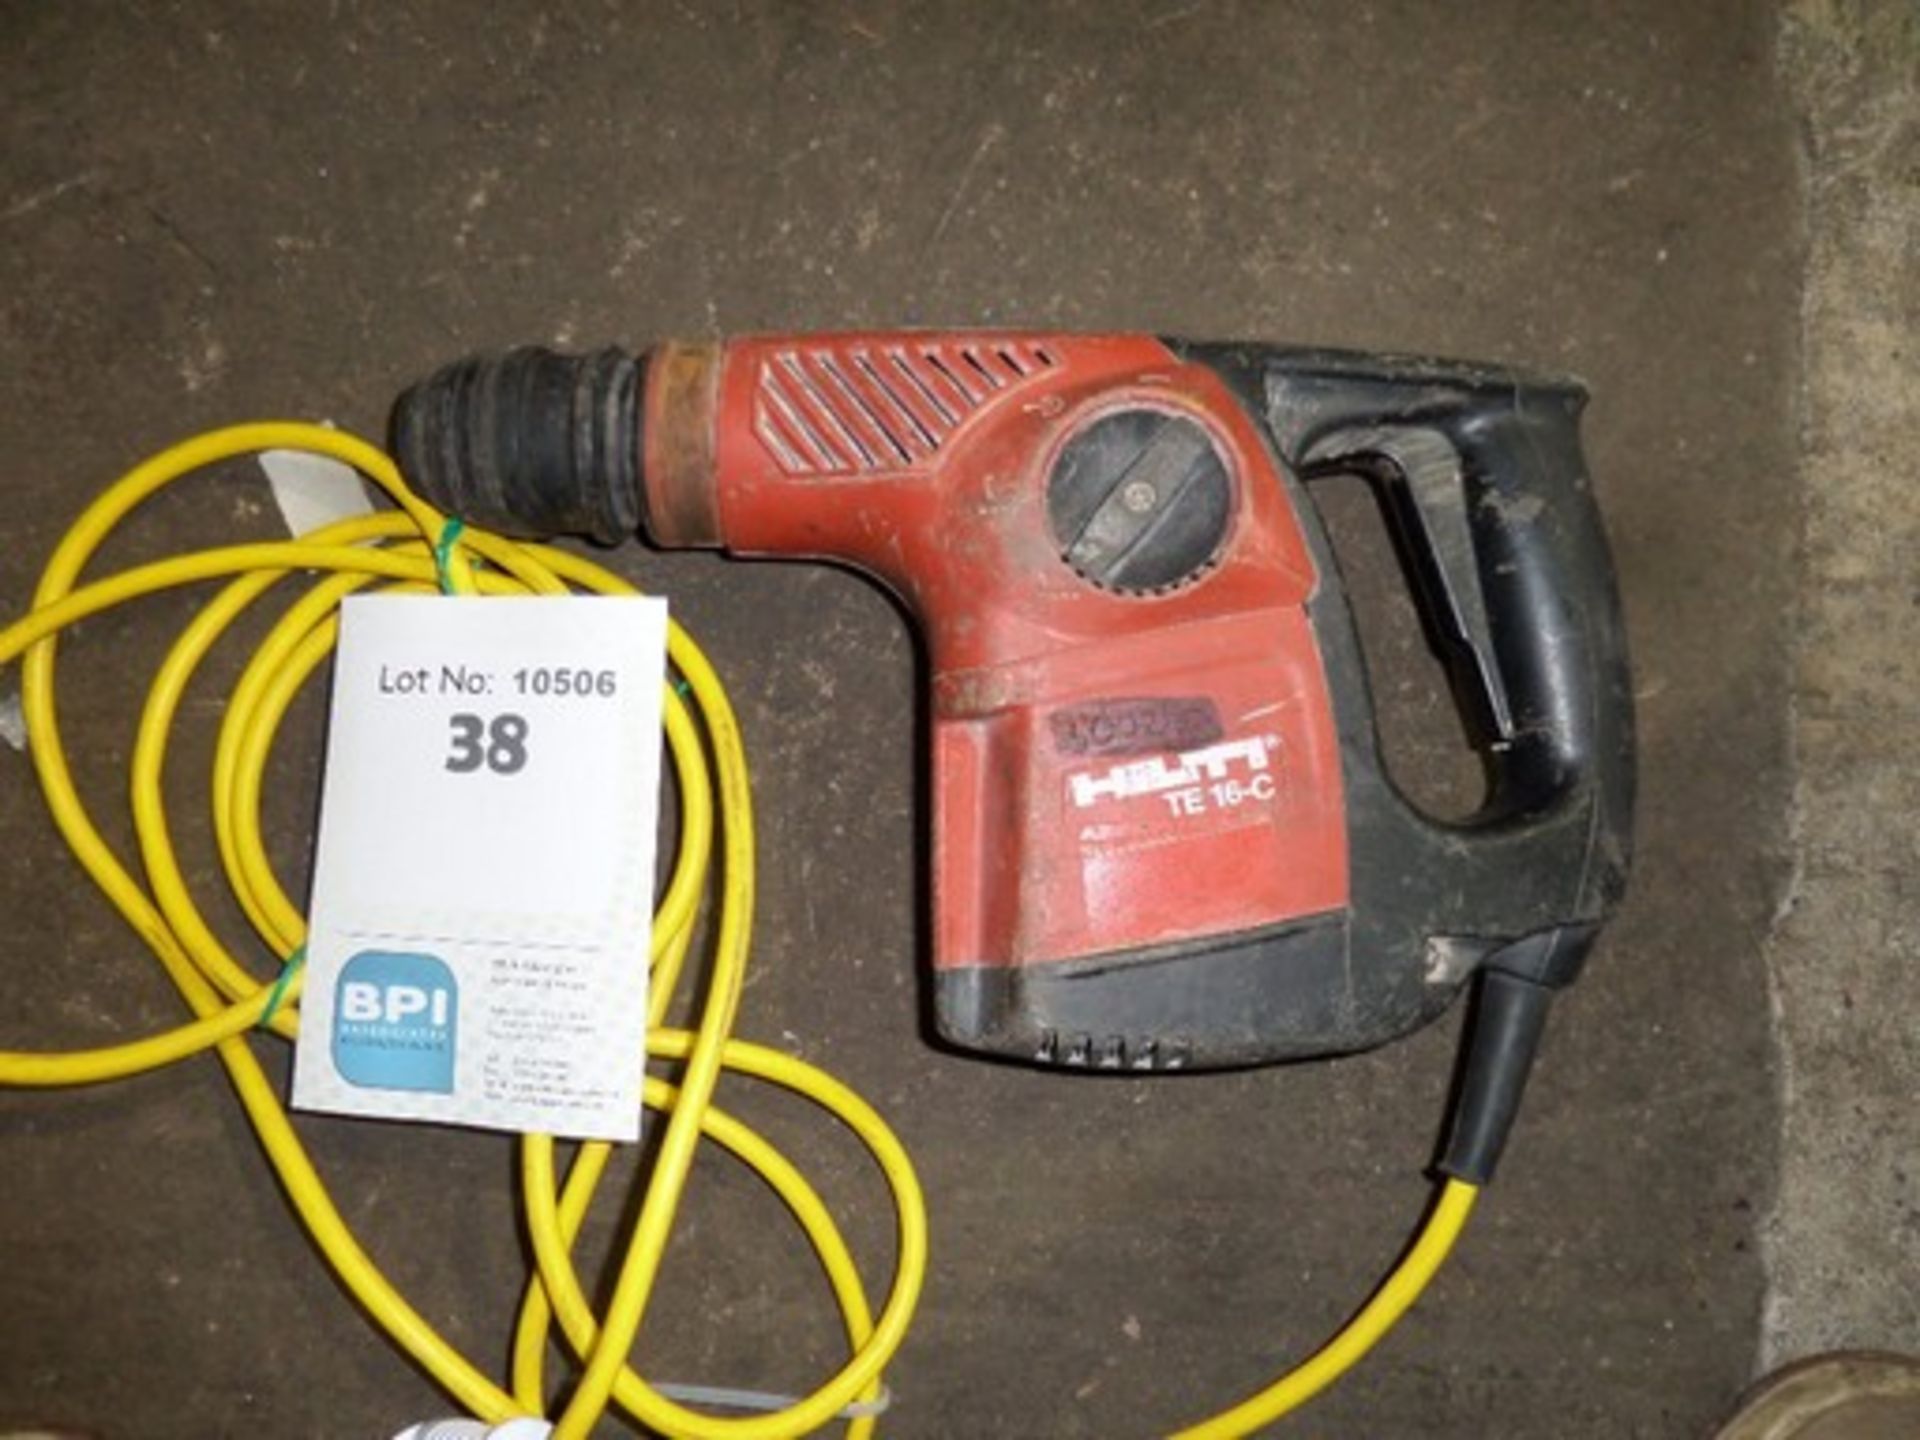 Hilti TE16-C {015184} HAMMER/DRILLER TE30C - 110V 110v 16amp connection and appears to be working